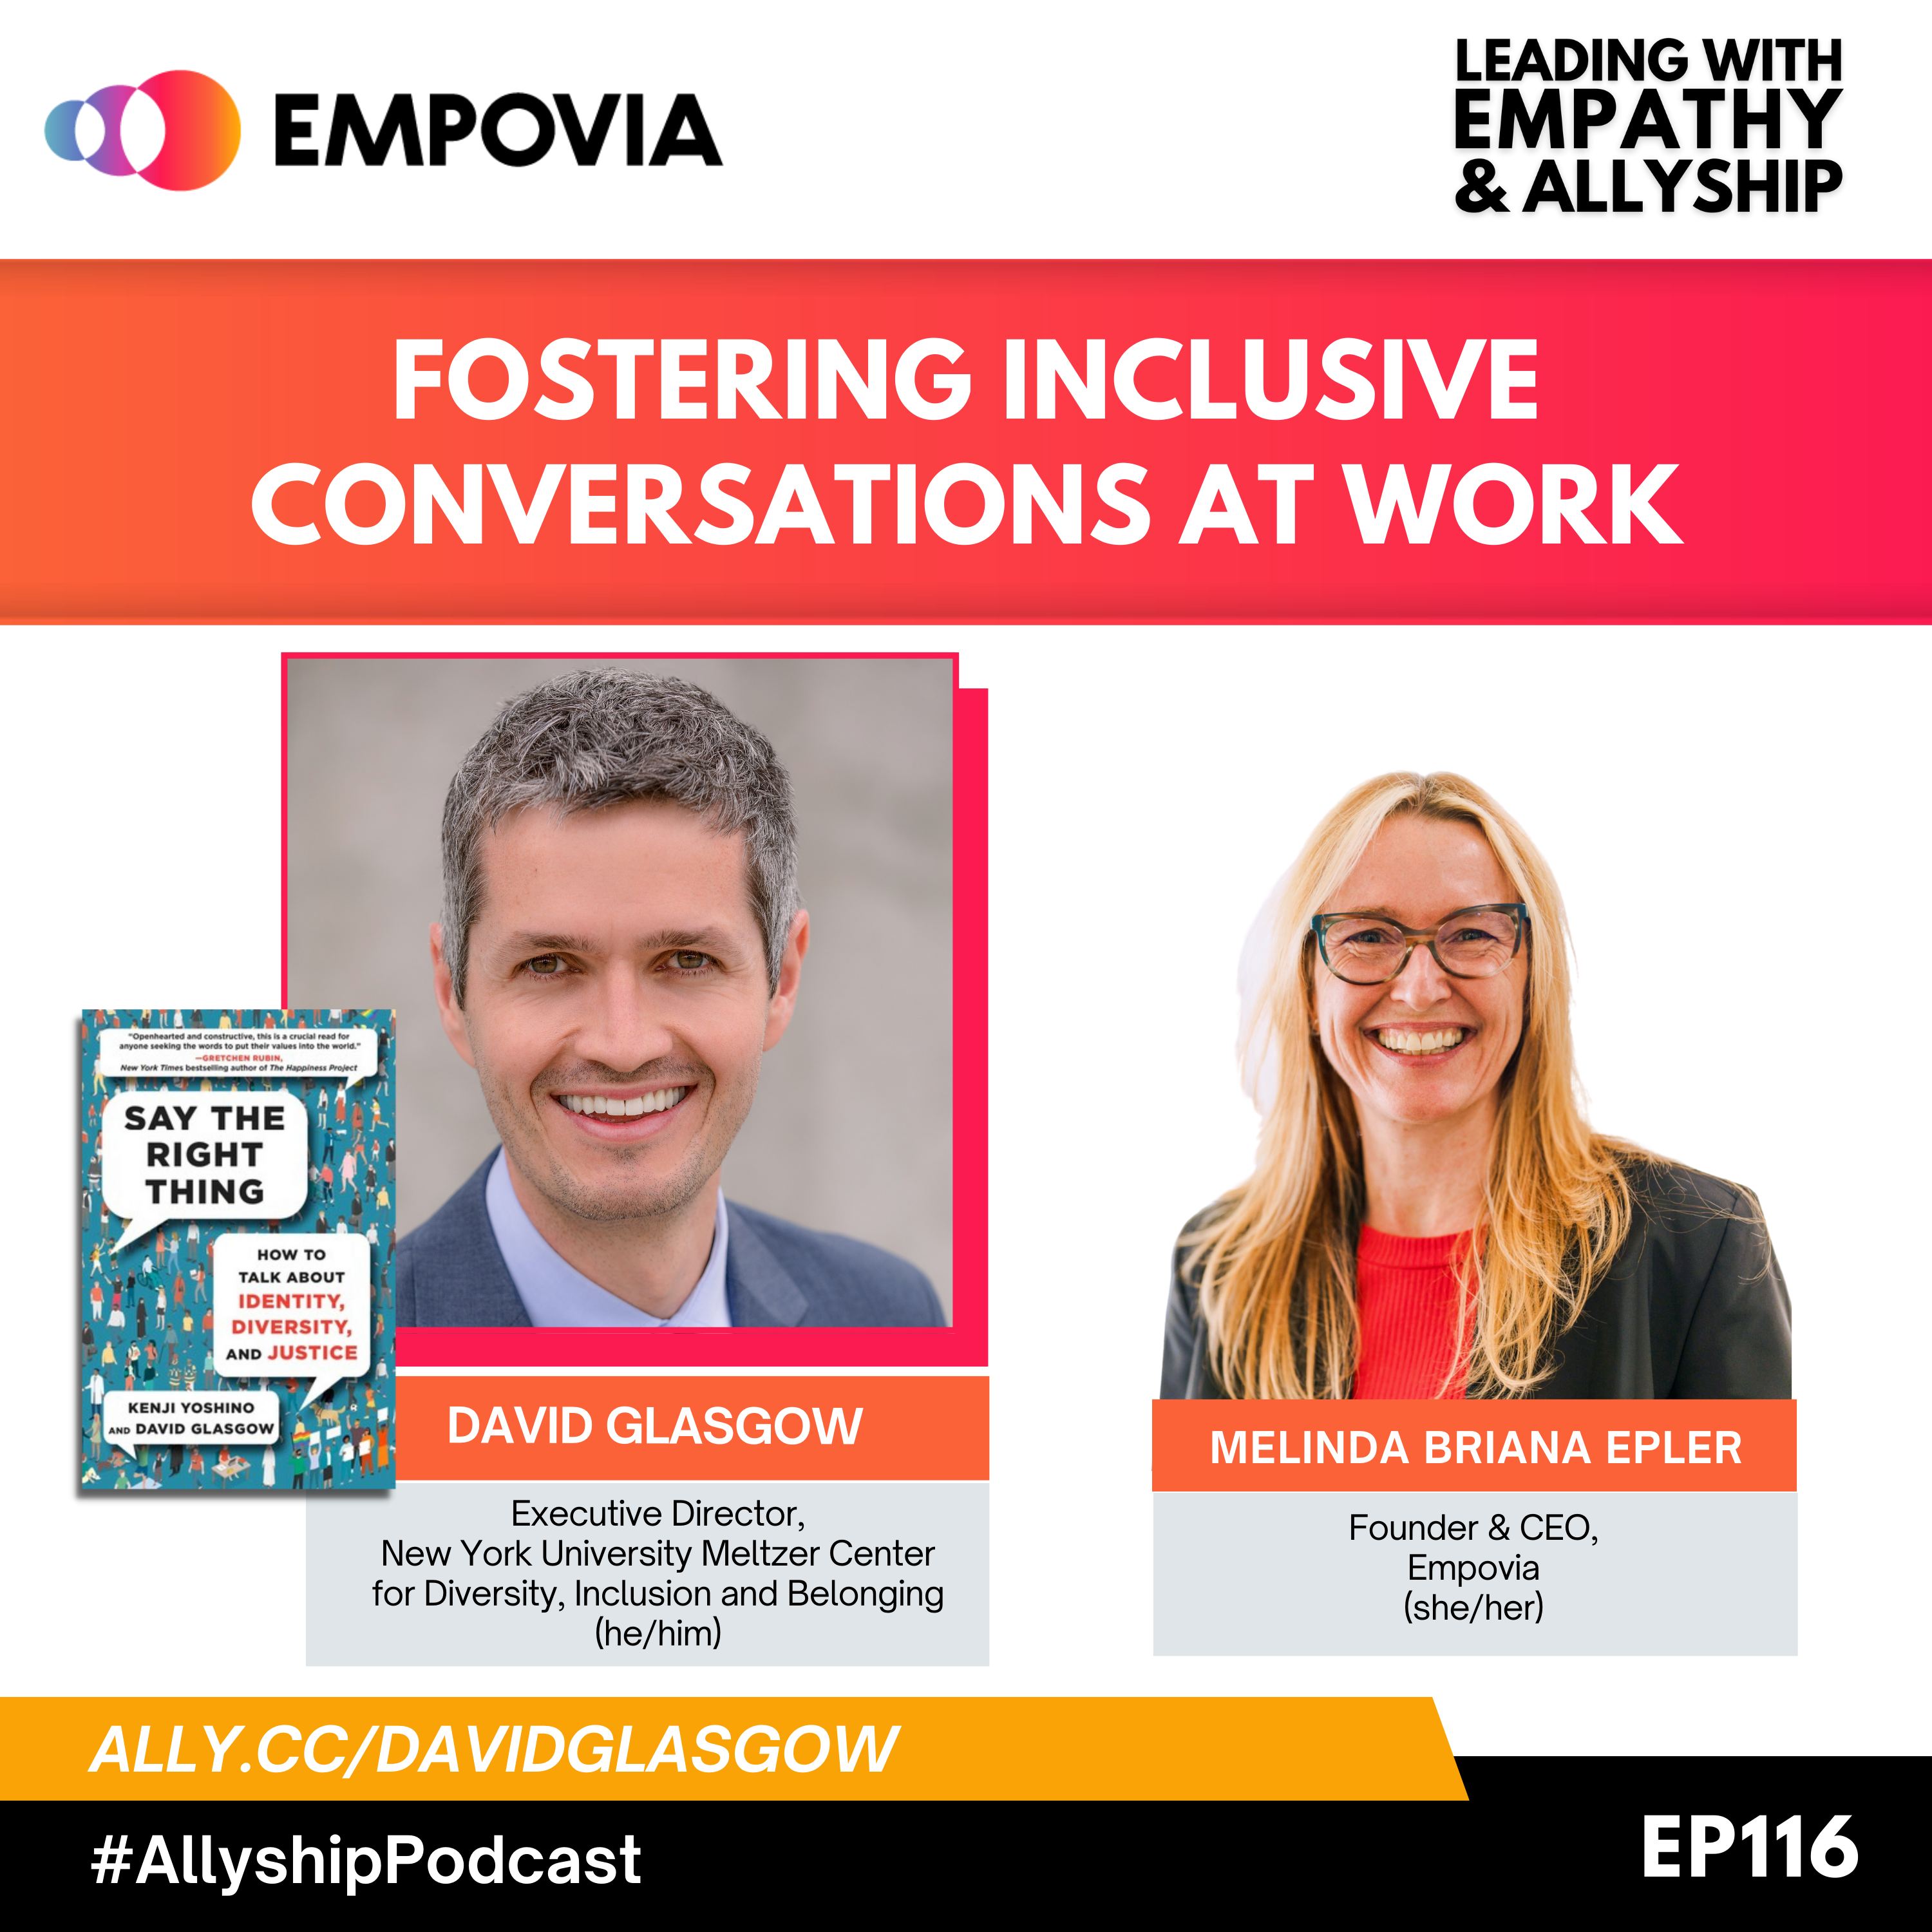 Leading With Empathy & Allyship promo and photos of David Glasgow, a White man with salt and pepper hair, facial hair, light blue shirt, and blue suit and tie; beside him is a blue book cover— with an illustration of diverse people— of SAY THE RIGHT THING: How to Talk about Identity, Diversity, and Justice; and host Melinda Briana Epler, a White woman with blonde and red hair, glasses, red shirt, and black jacket.